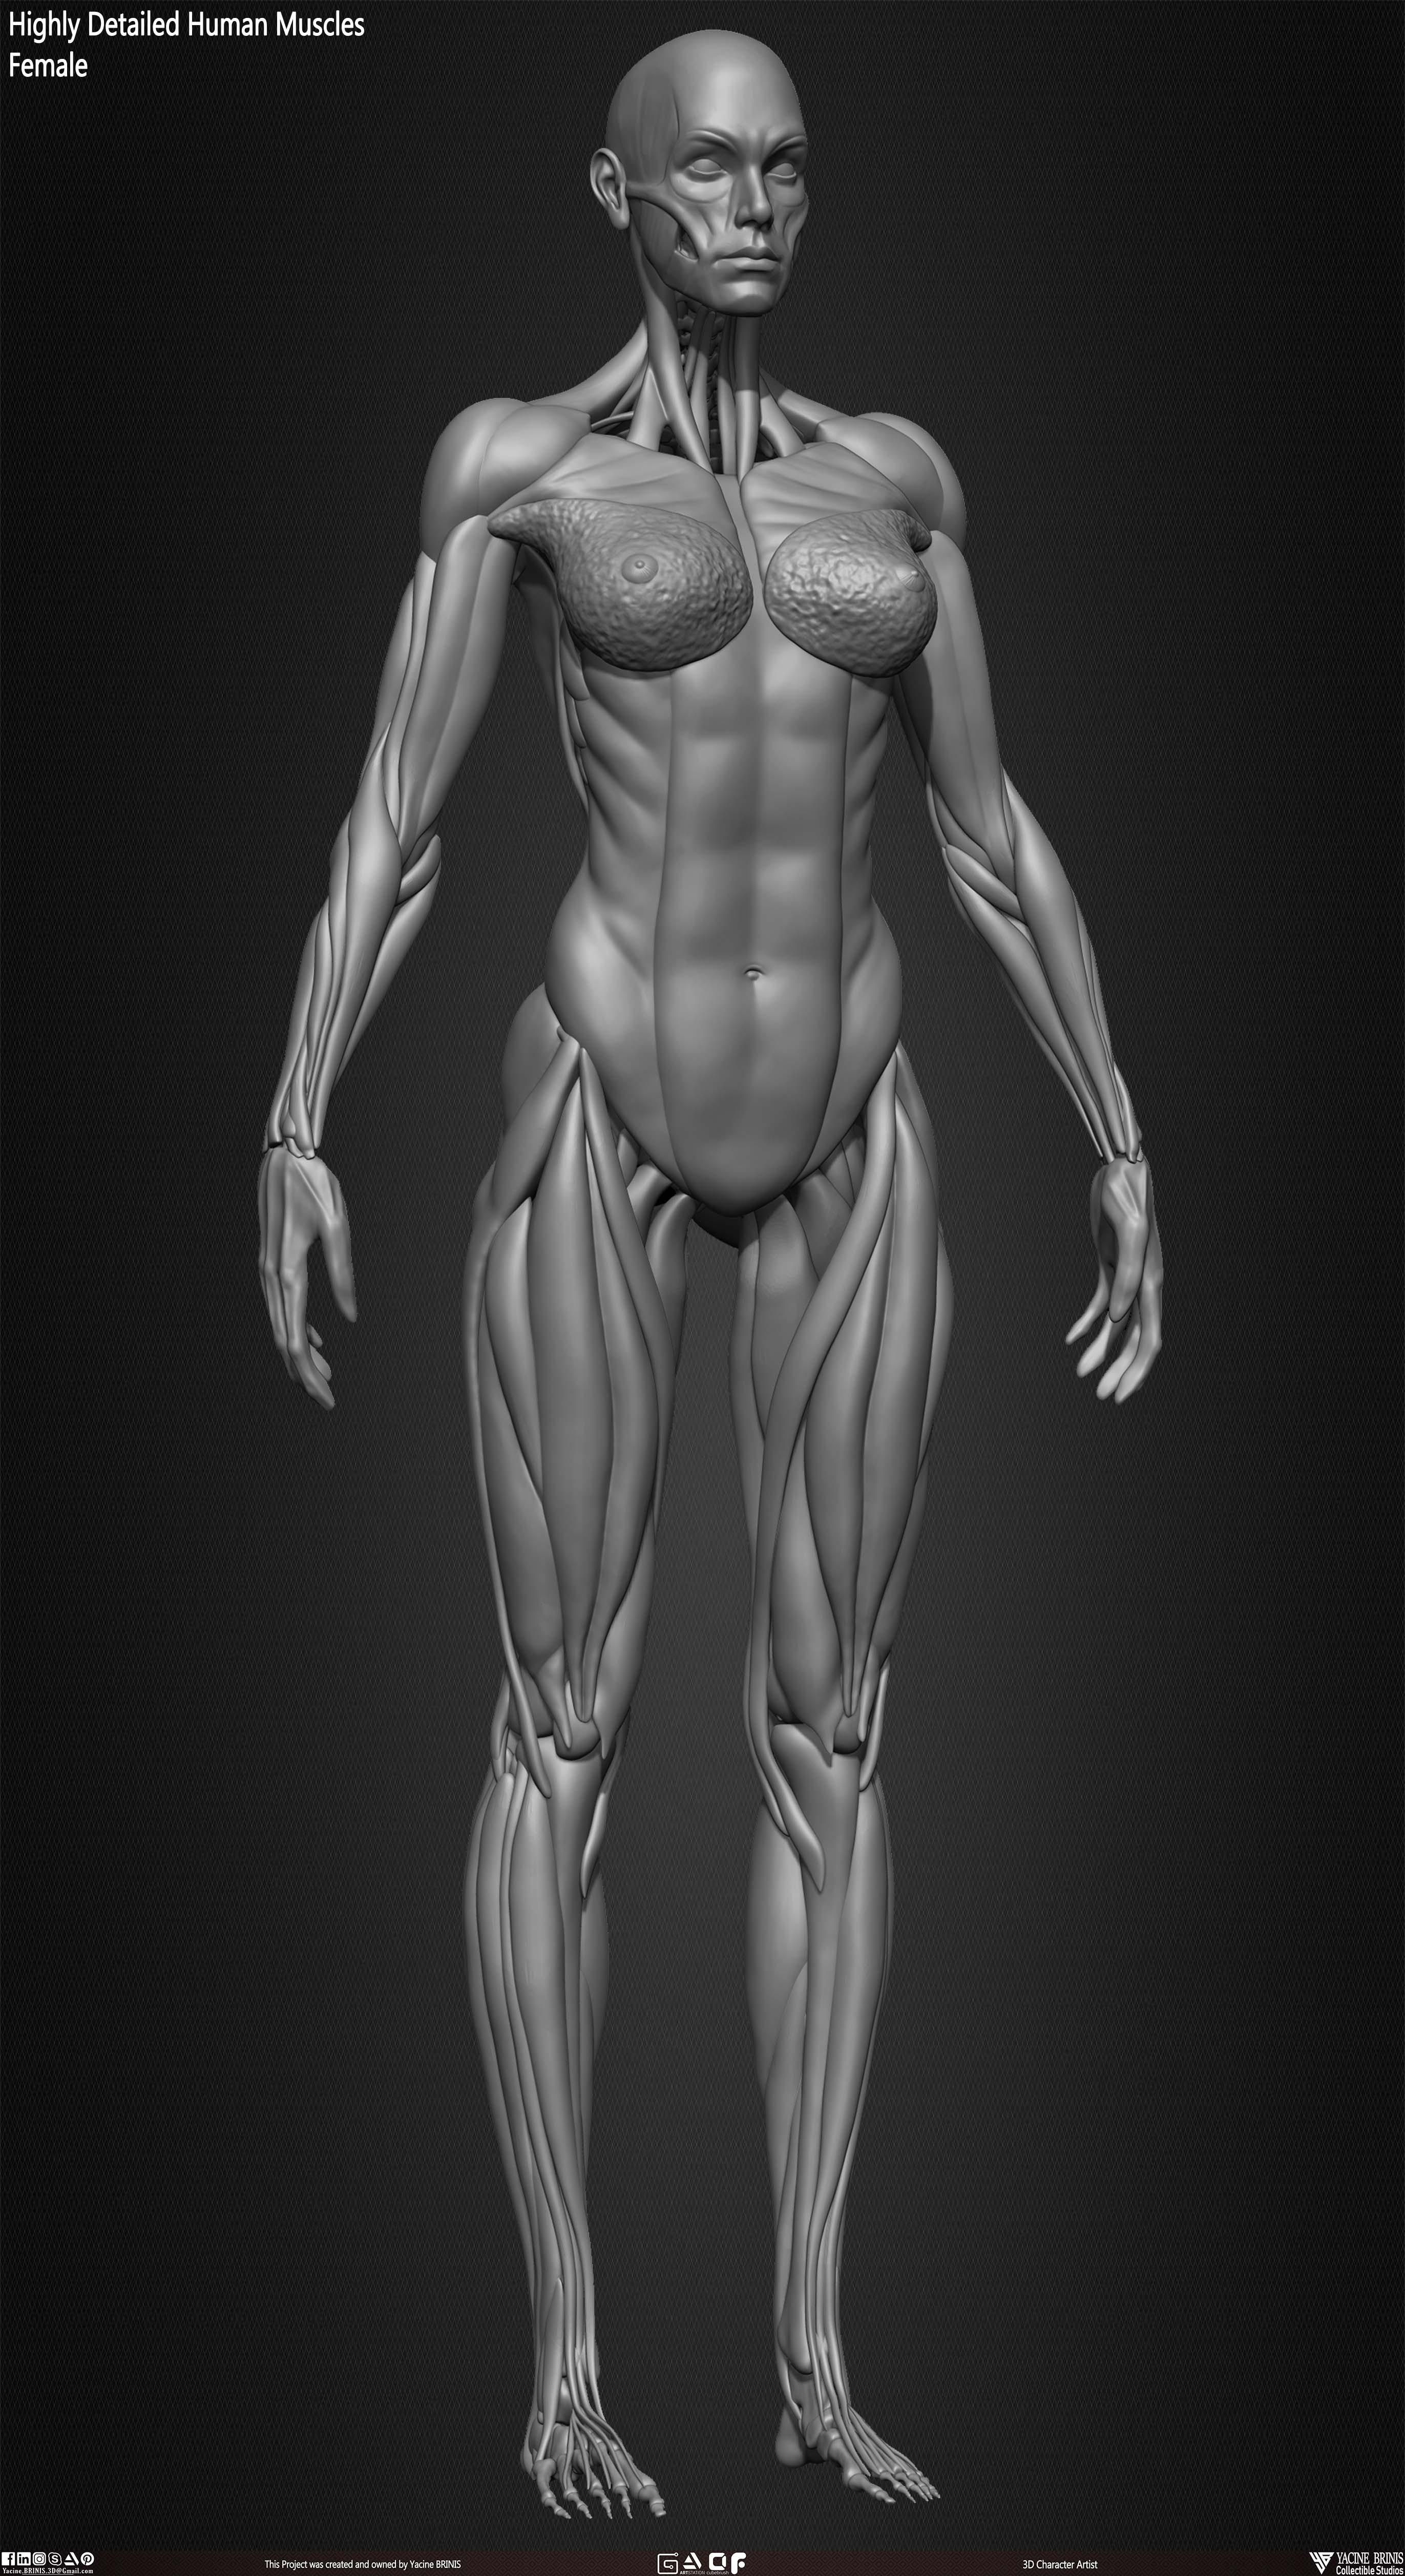 Female Human Muscles 3D Model sculpted by Yacine BRINIS 022